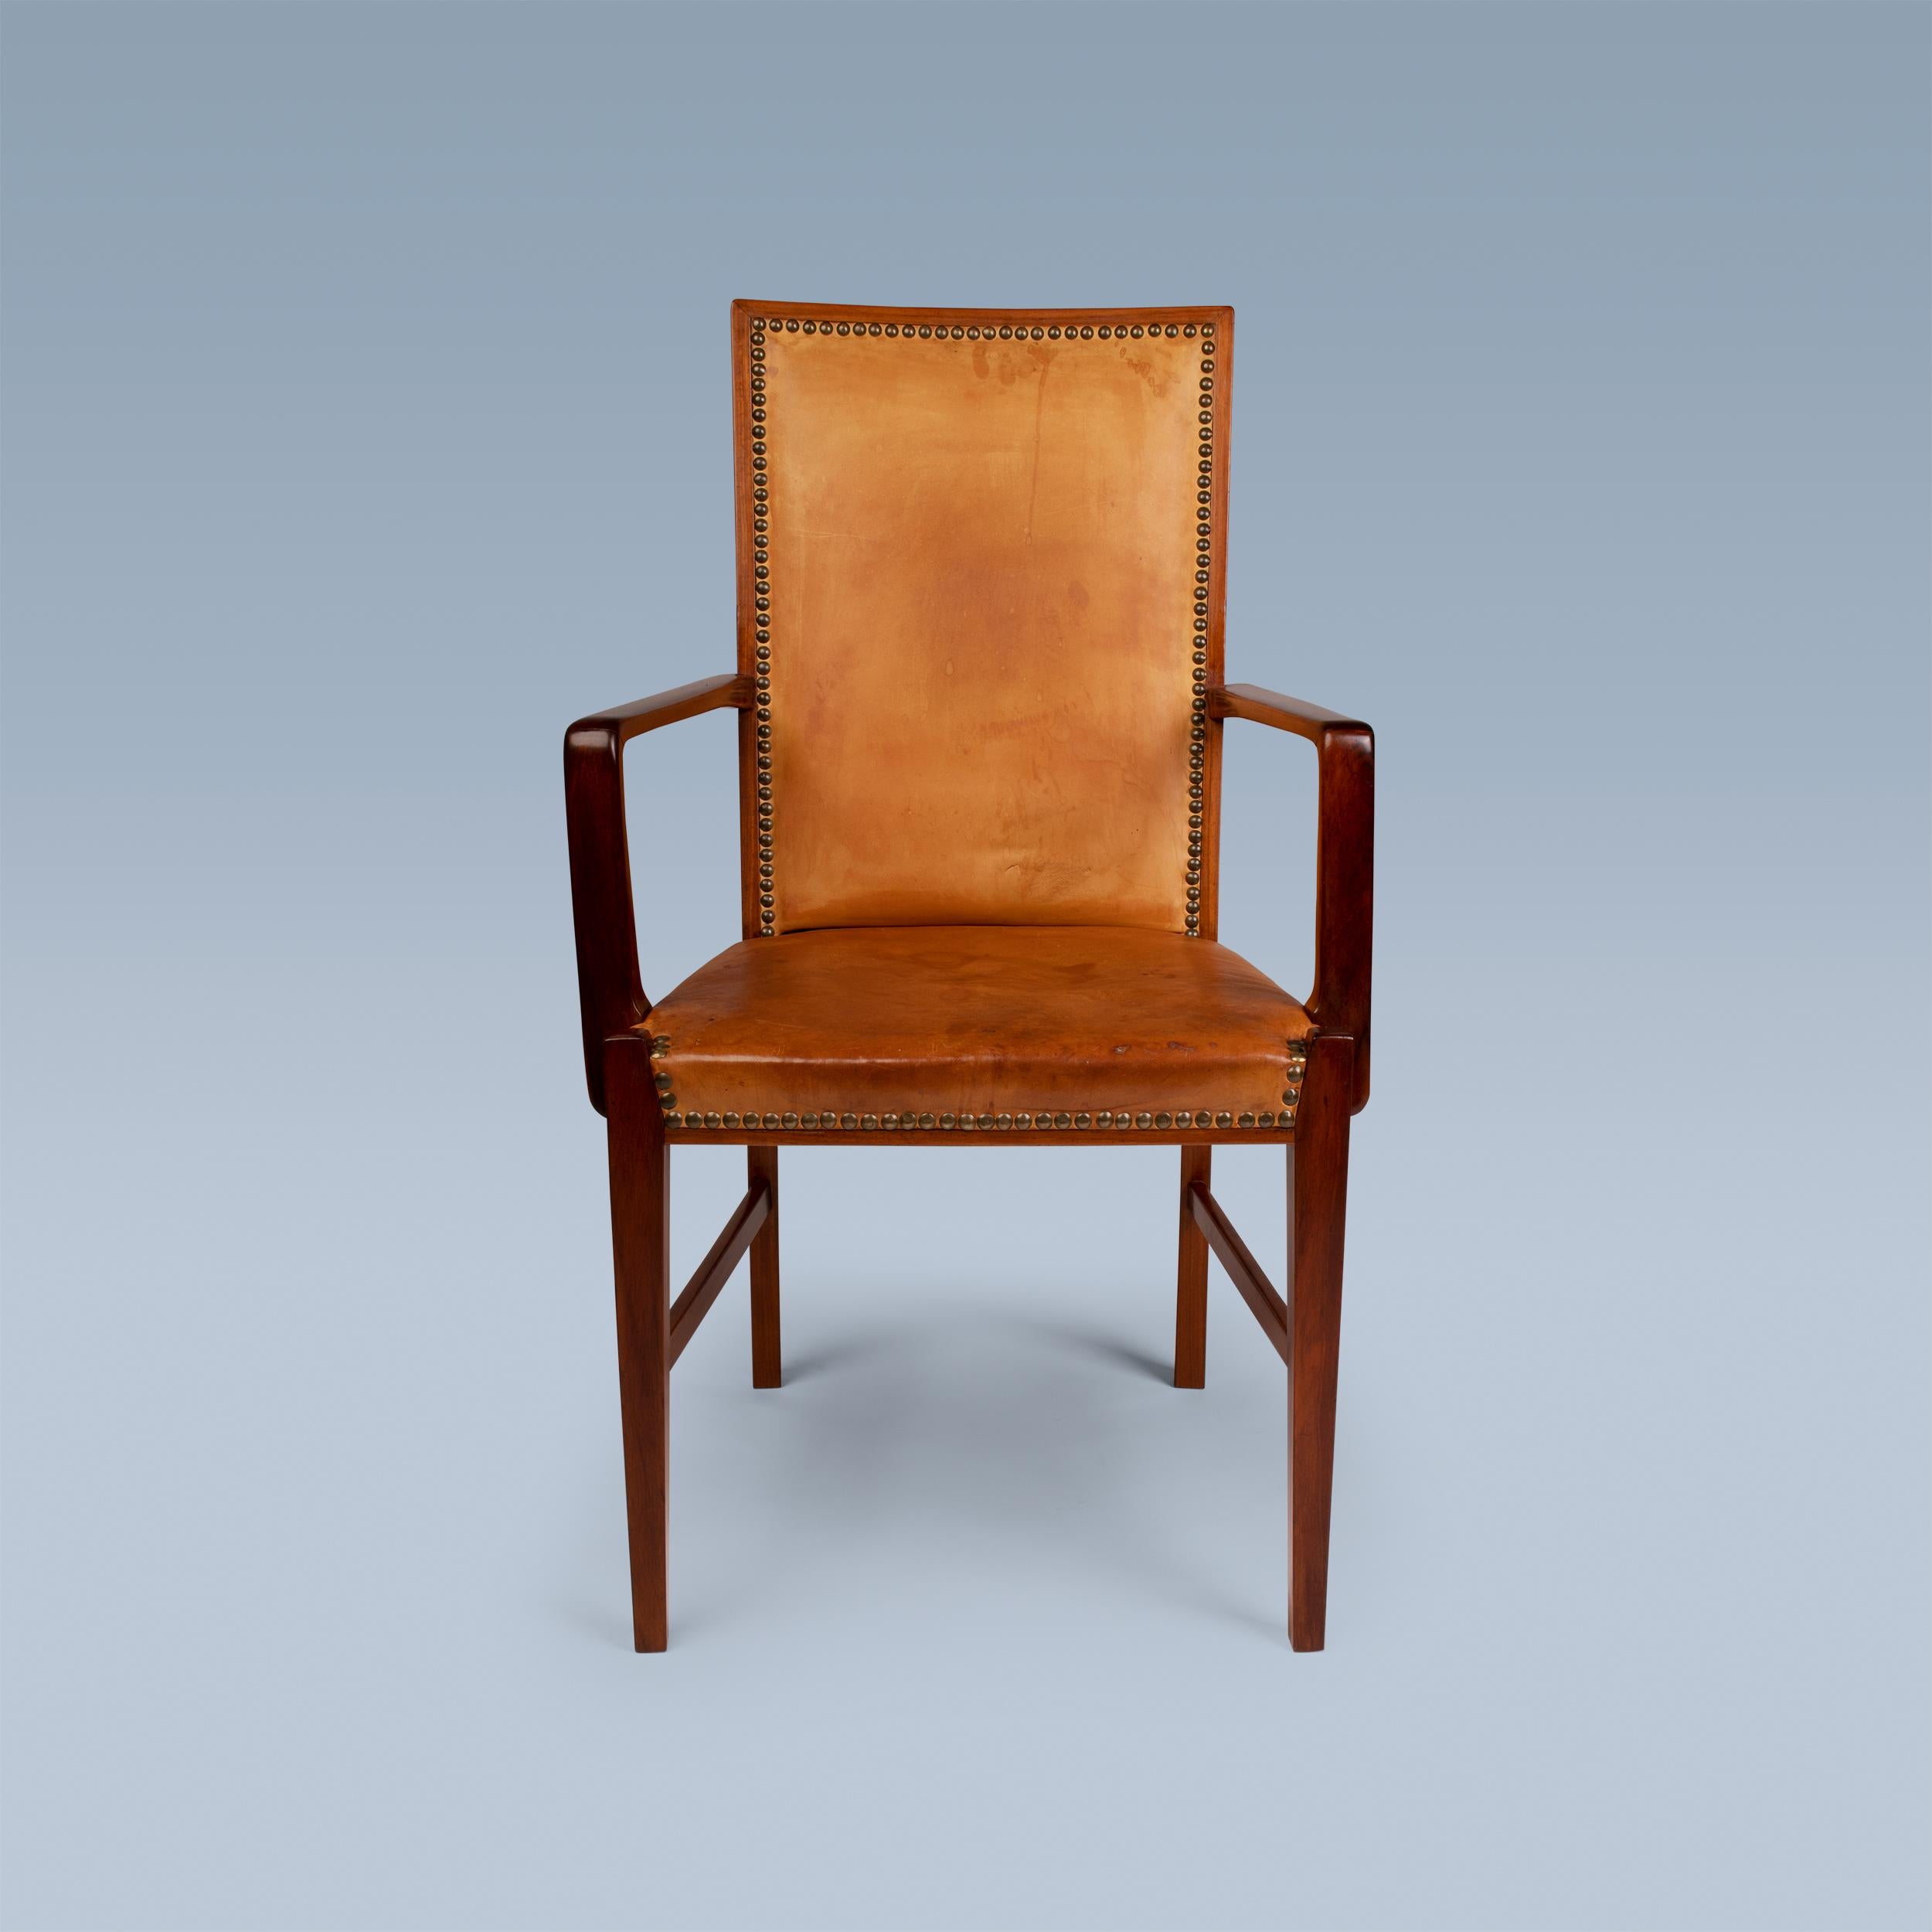 This highback armchair by a Danish cabinetmaker has a frame of nutwood.
It is upholstered with patinated leather and fitted with brass nails.
Ideal desk chair or head of the table chair.